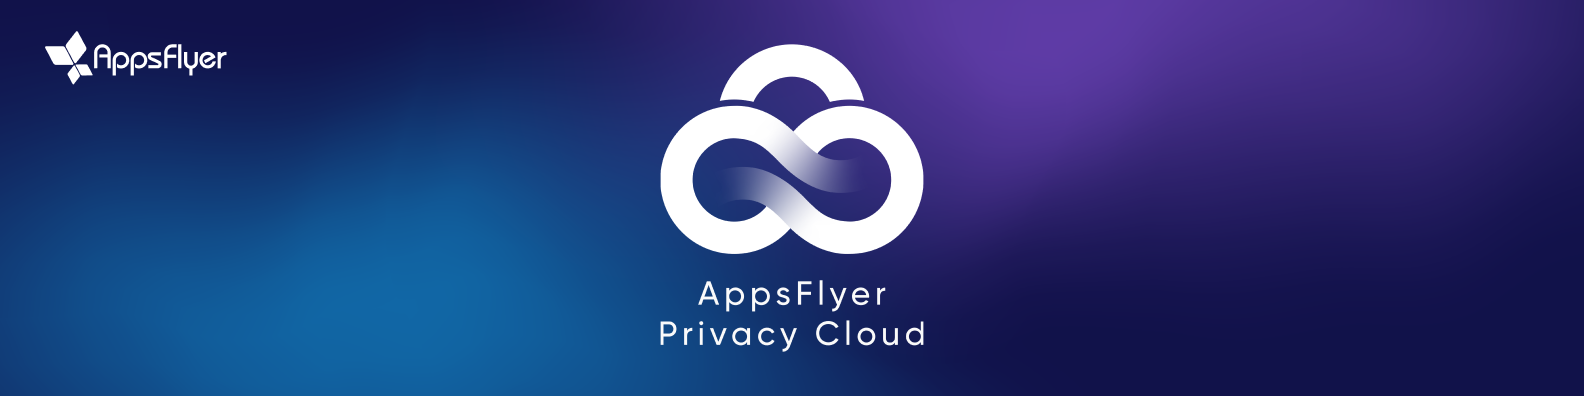 privacy_cloud_logo.png